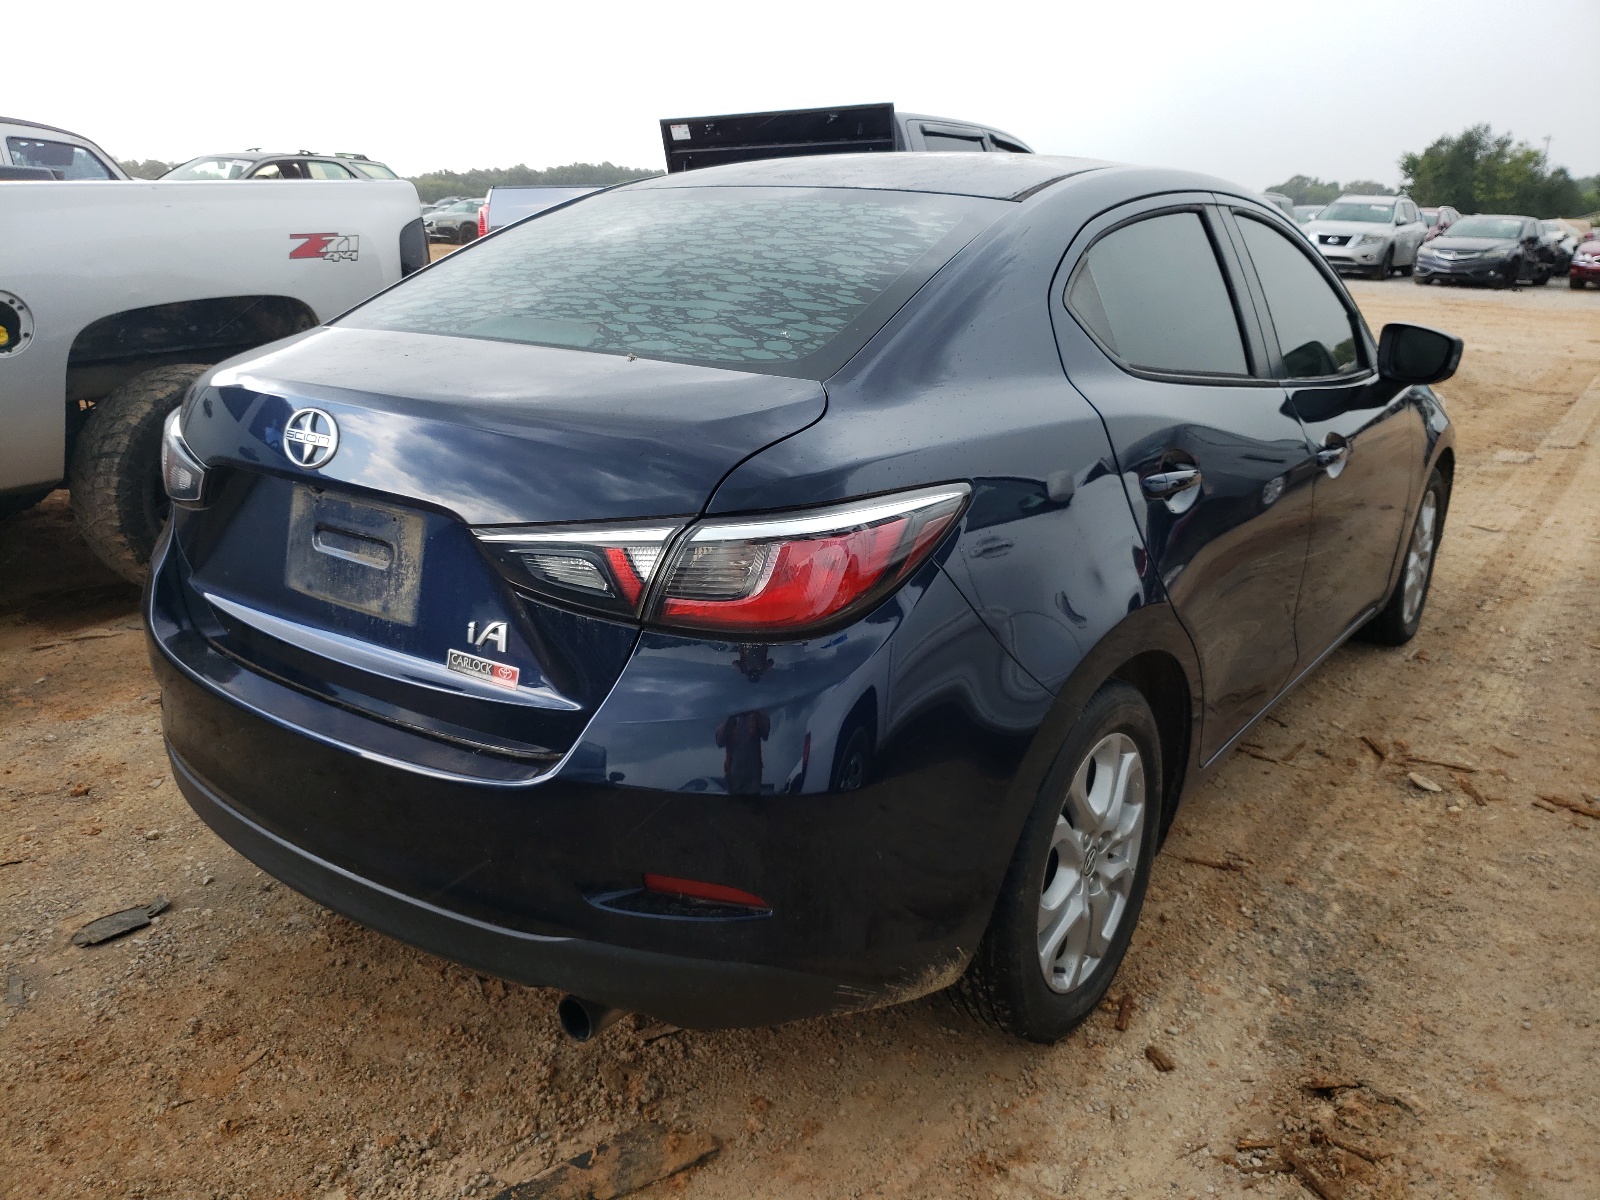 3MYDLBZVXGY****** Salvage and Wrecked 2016 Scion iA in Alabama State